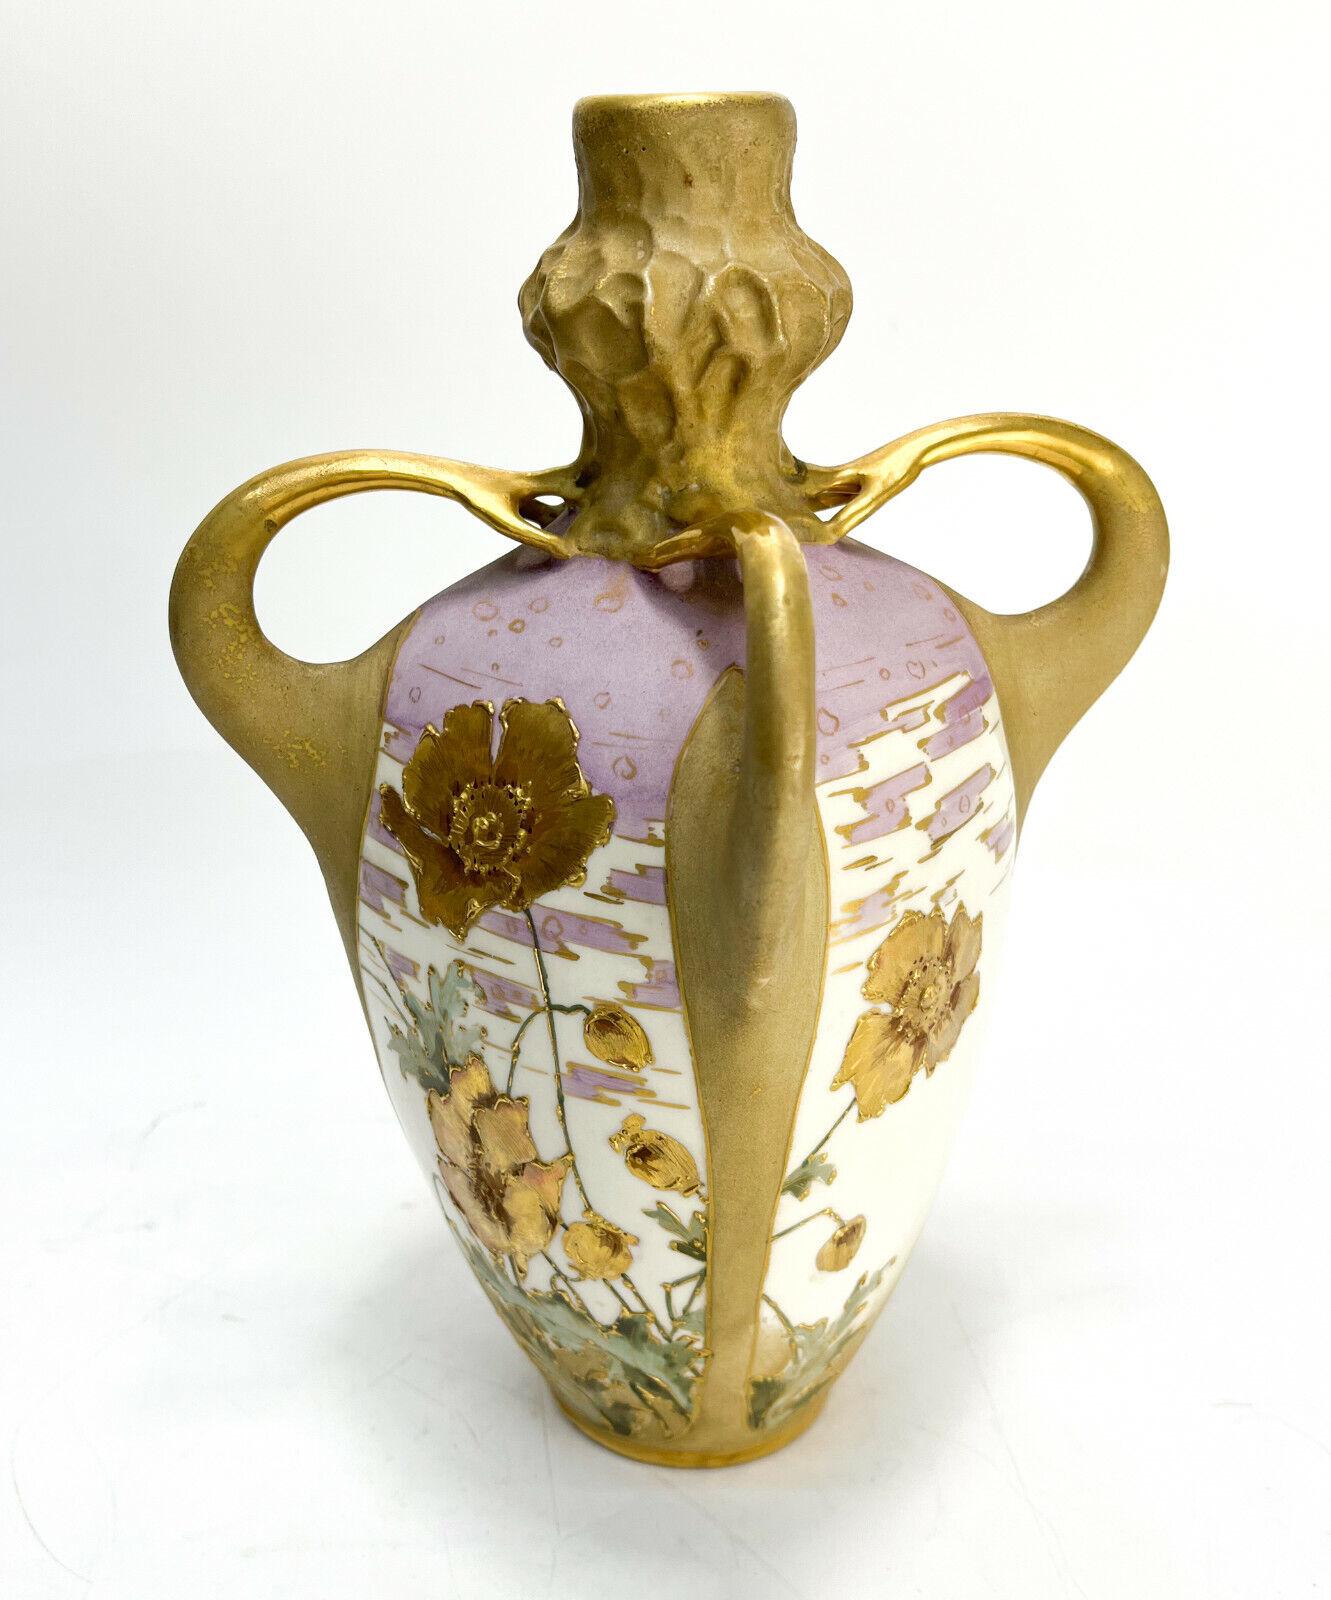 Amphora Austria Porcelain 4 Handled Art Nouveau Vase, circa 1890.

A peach and lavender ground with gold encrusted flowers throughout. Impressed Amphora mark to underside. 

Additional Information:
Country/Region of Manufacture: Austria